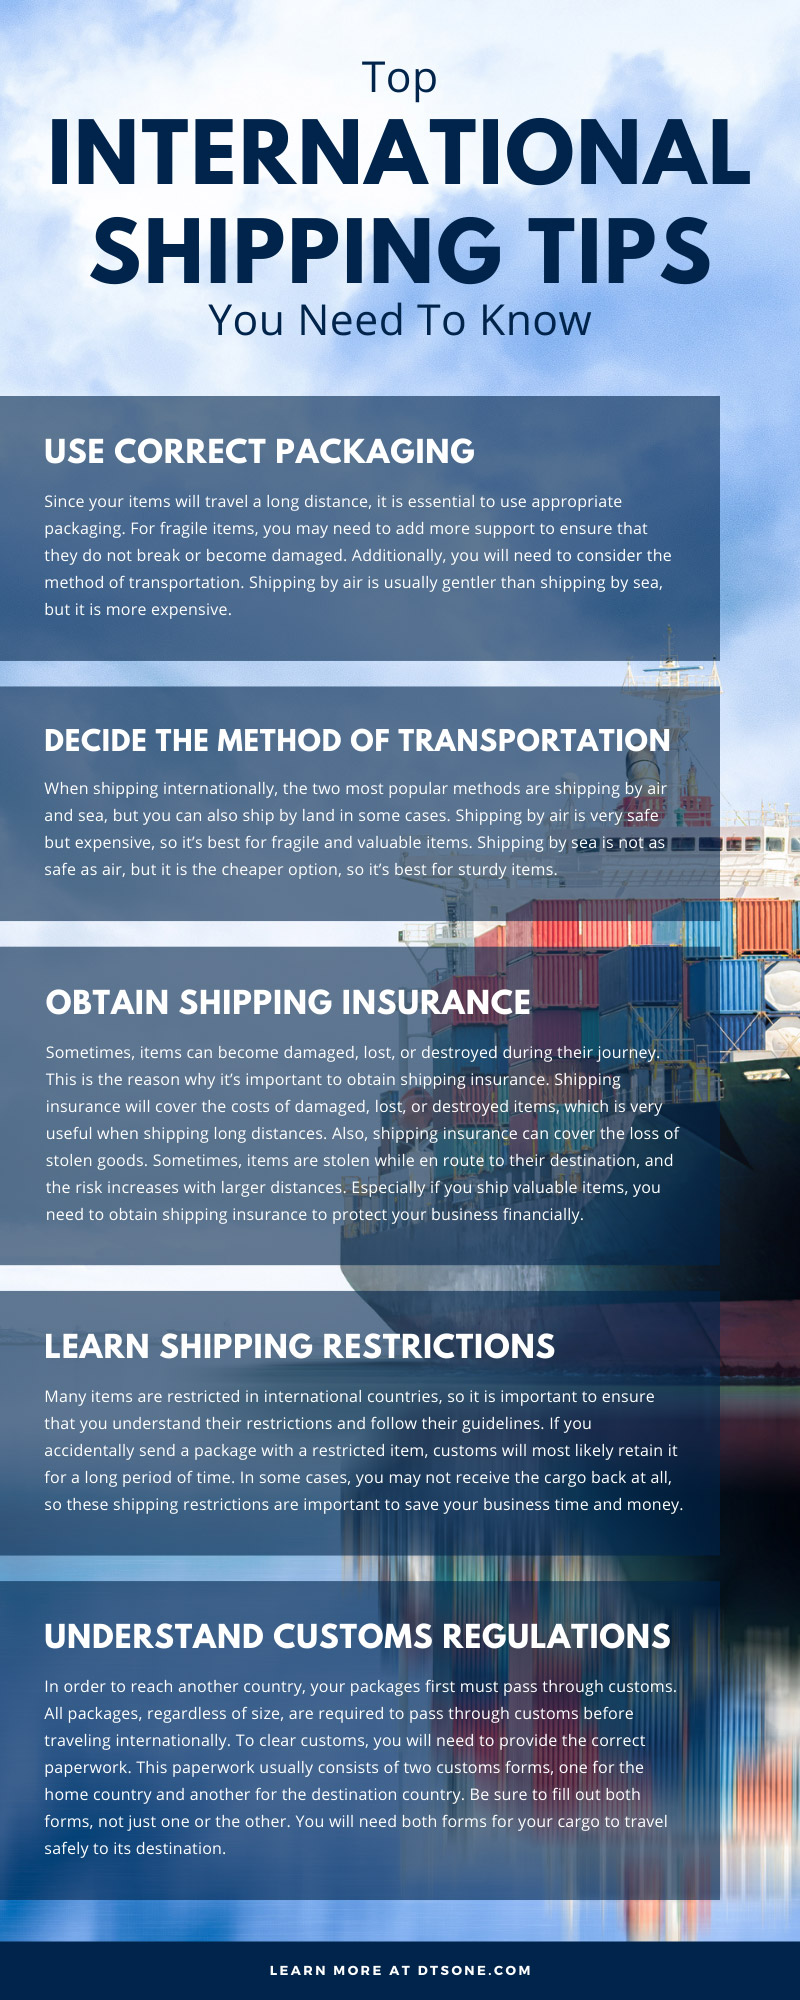 Top 10 International Shipping Tips You Need To Know